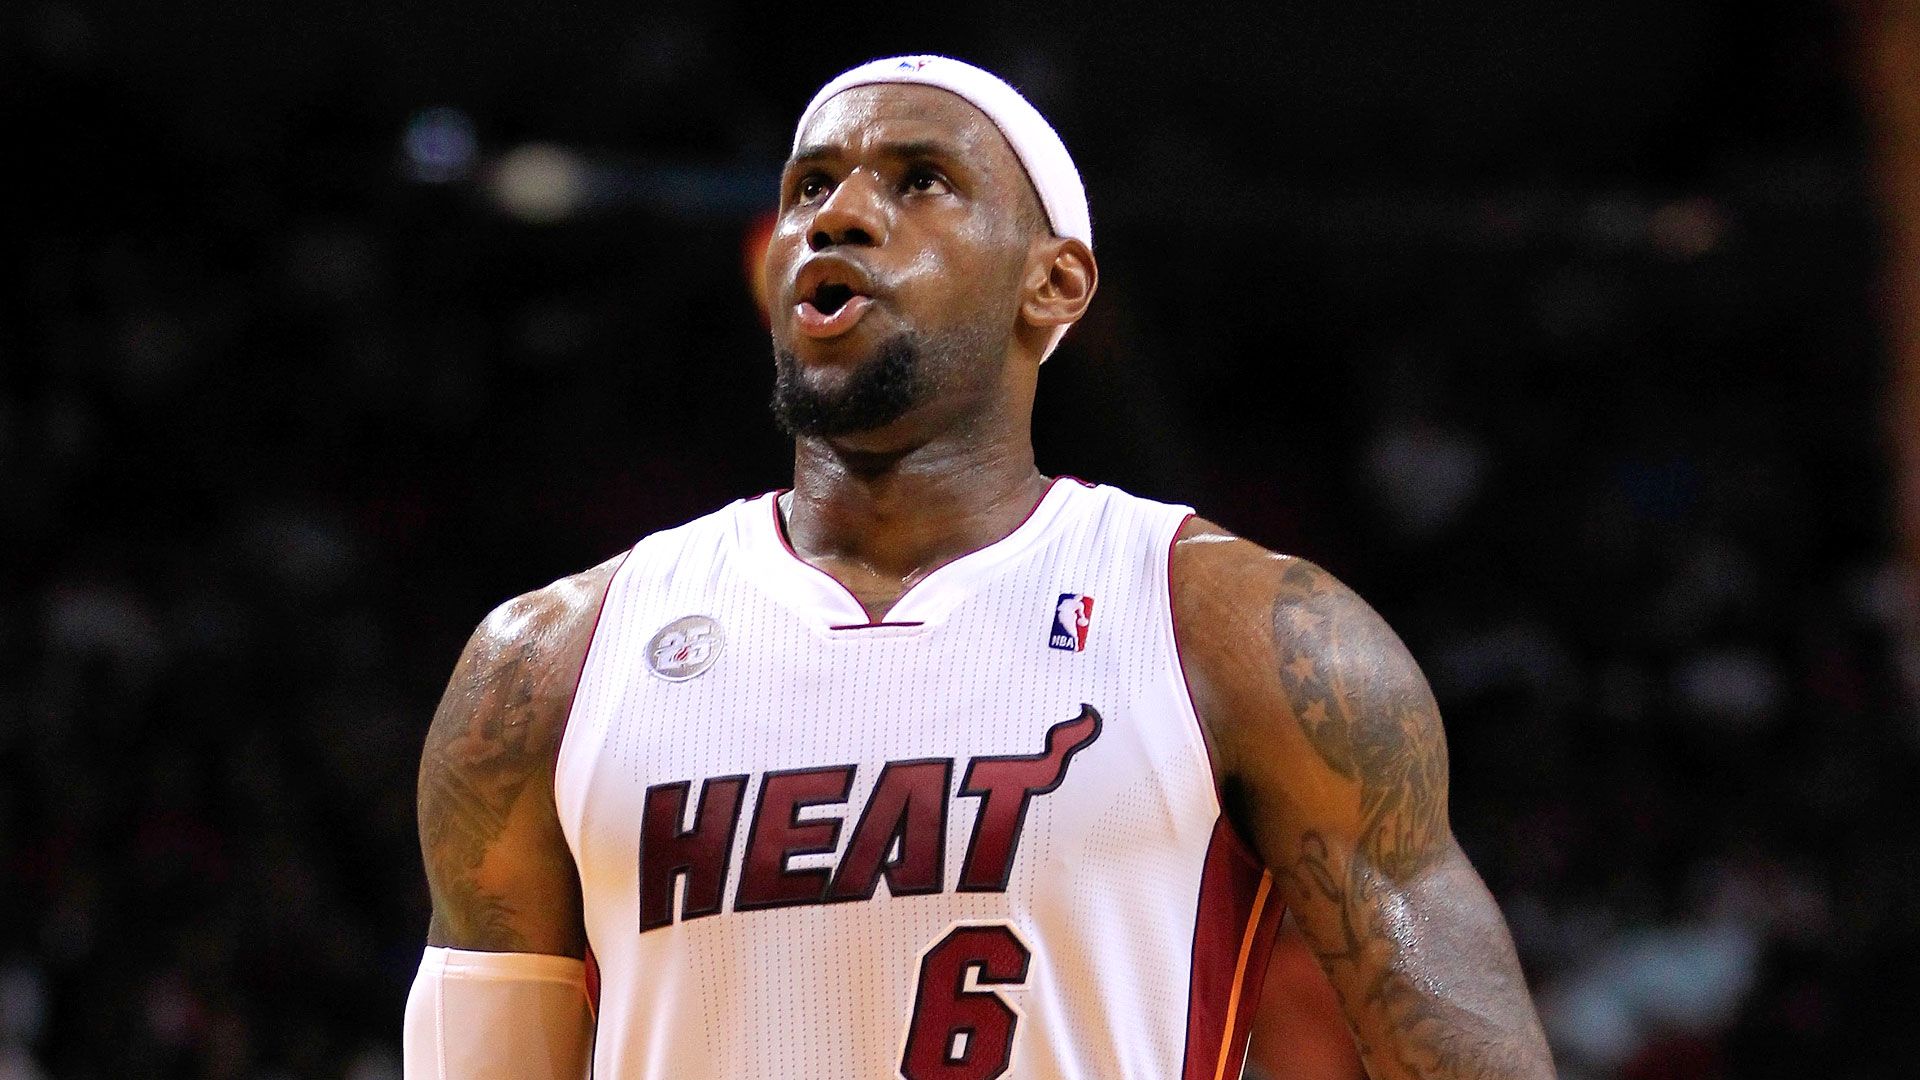 LeBron James claims first in NBA jersey sales, again - Los Angeles